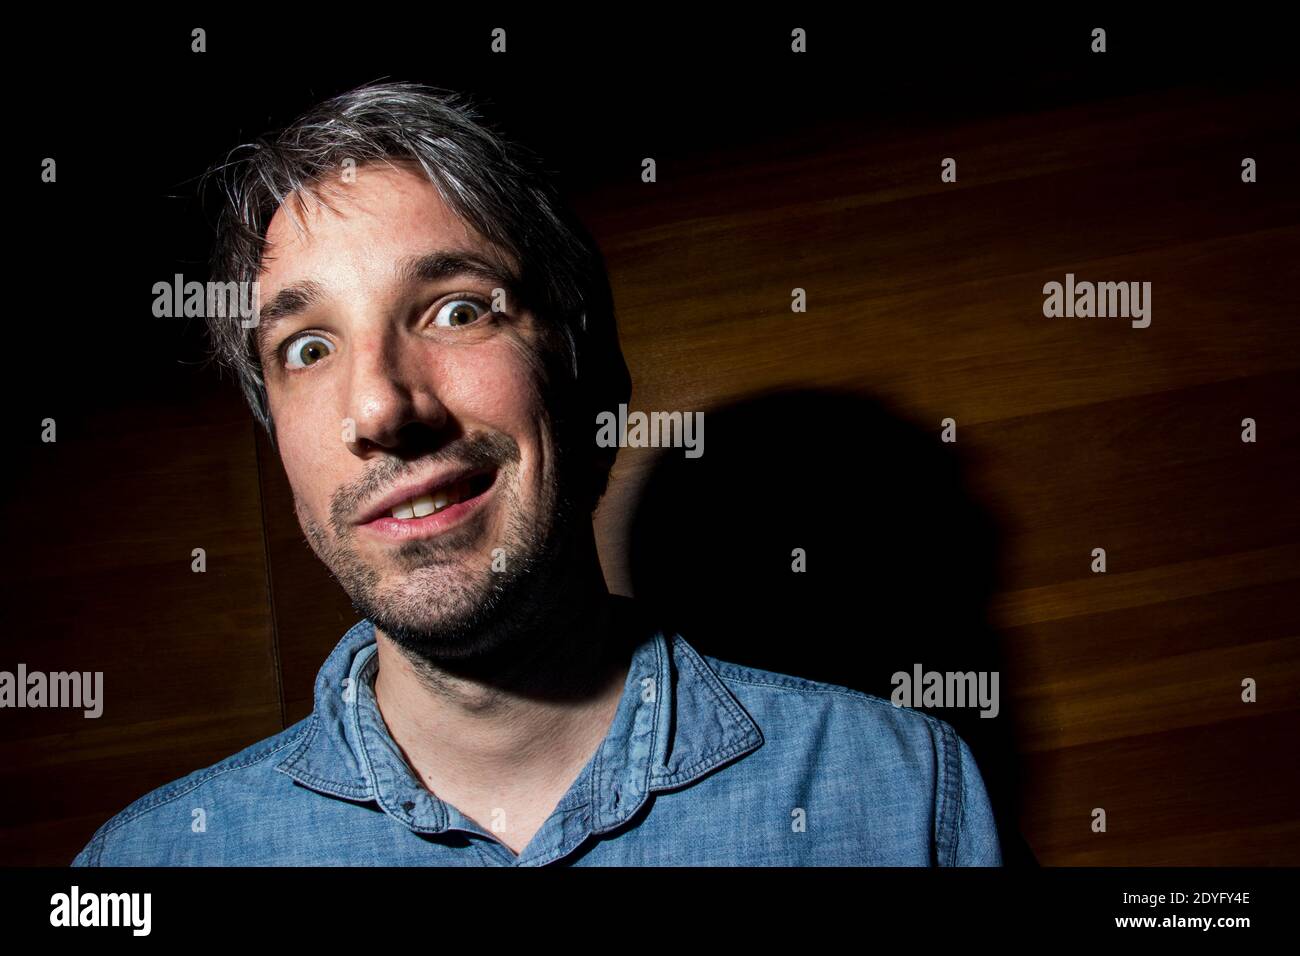 Guillaume Meurice. Portrait of the humorist and chronicler of France Inter  Guillaume Meurice. Guillaume Meurice. Portrait de l'humoriste et chroniqueu  Stock Photo - Alamy